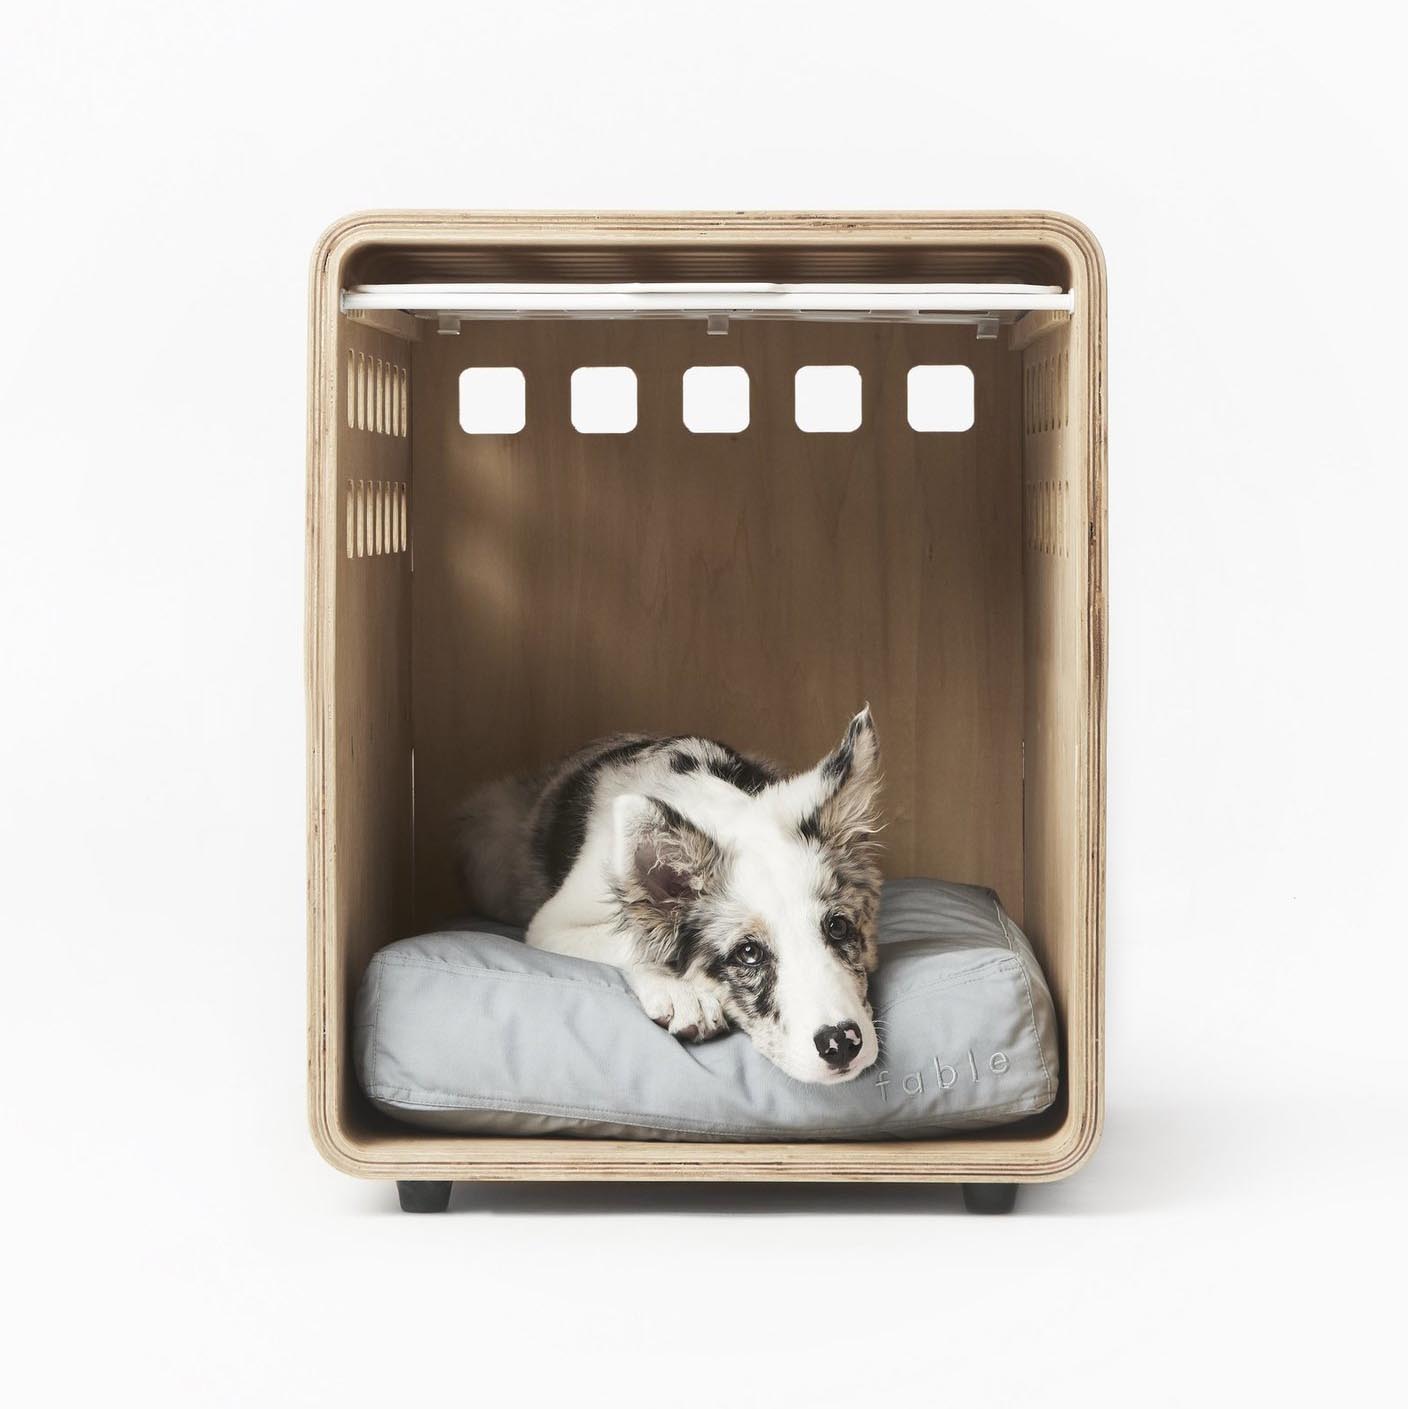 https://coolhunting.com/wp-content/uploads/2021/09/medium-dog-crate-fable.jpg